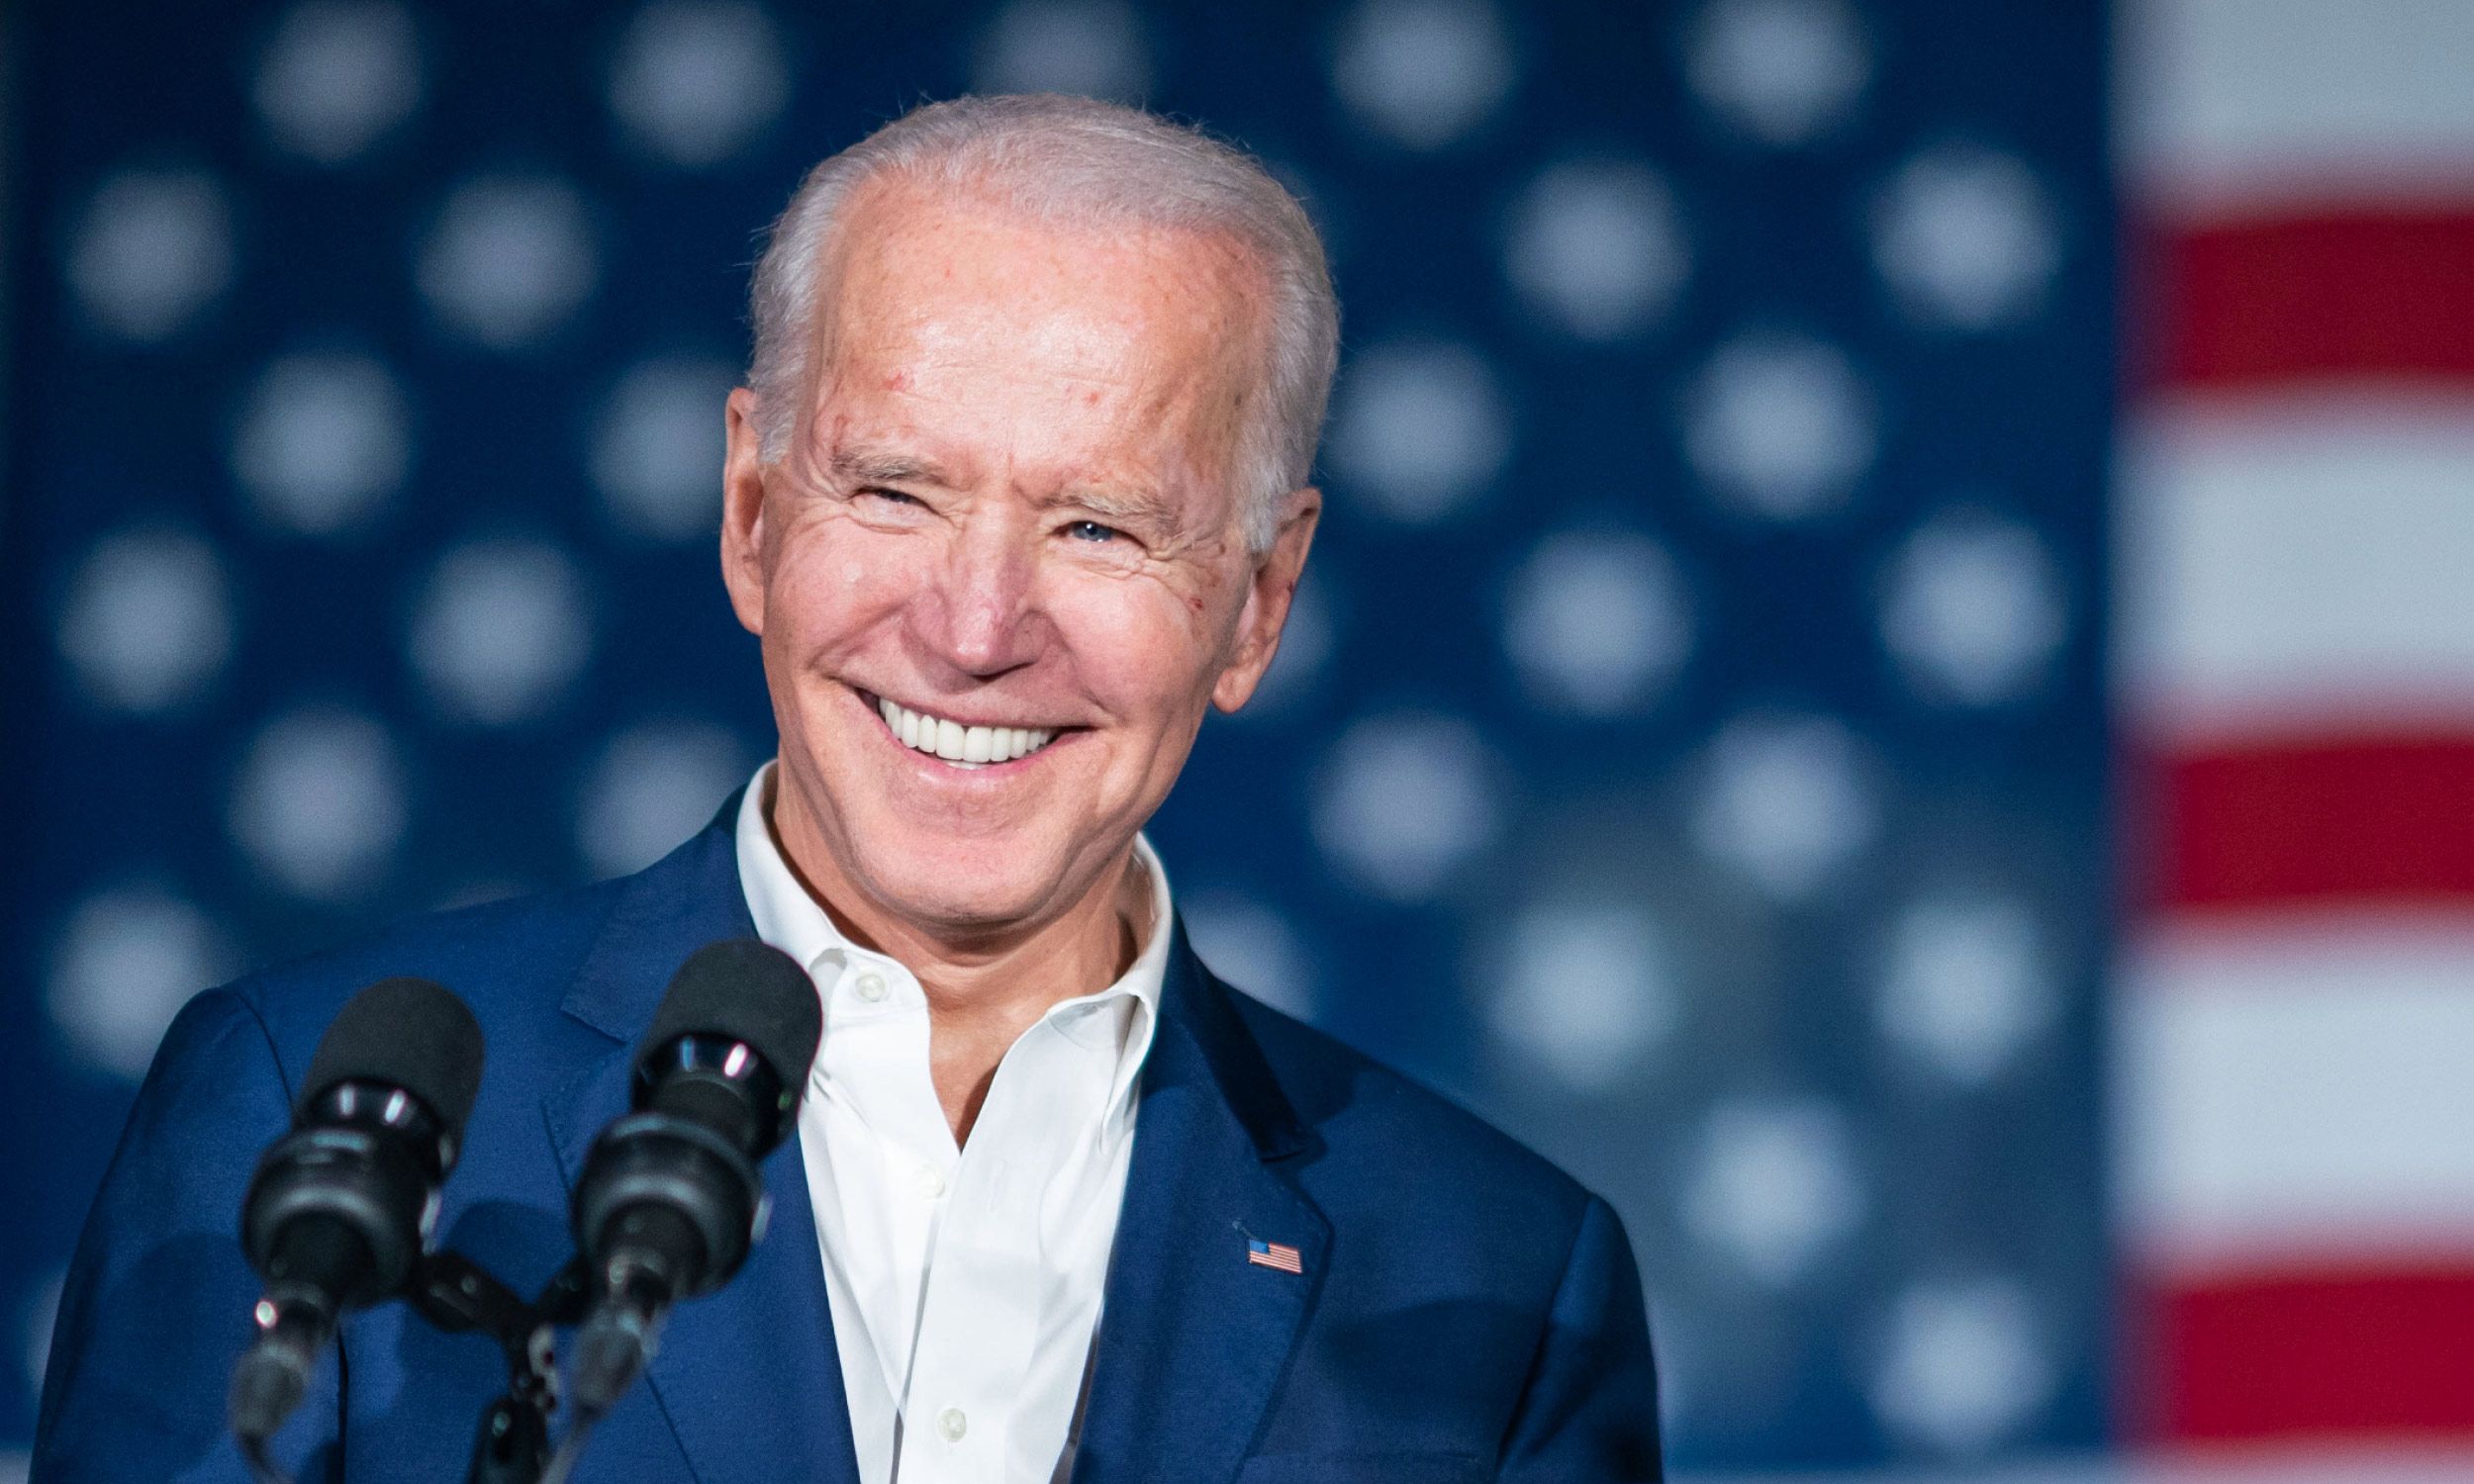 Biden's 19 trillion Covid relief package passed